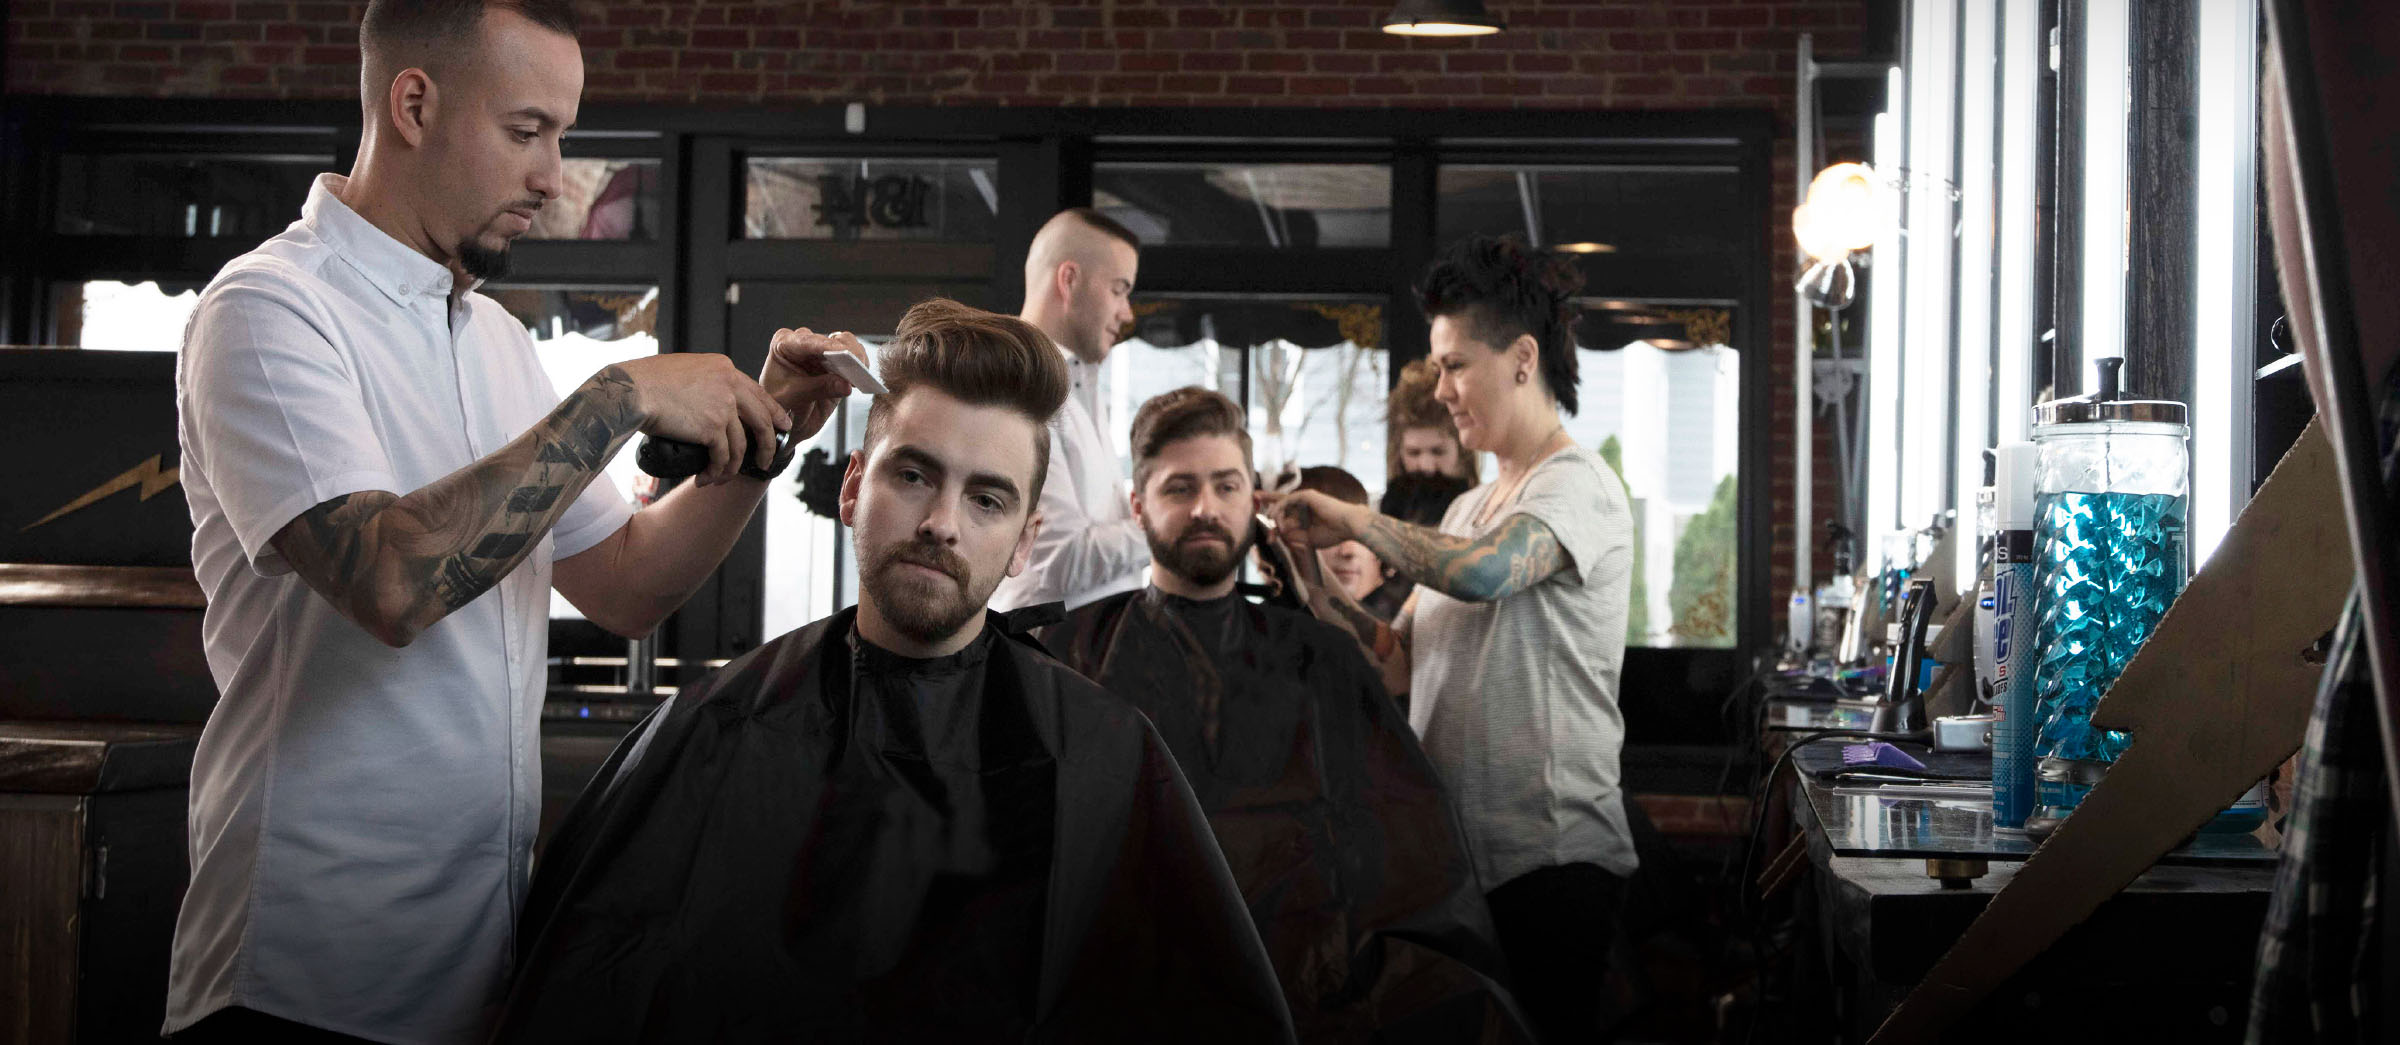 Learn with Andis - Product in use in Barber Shop